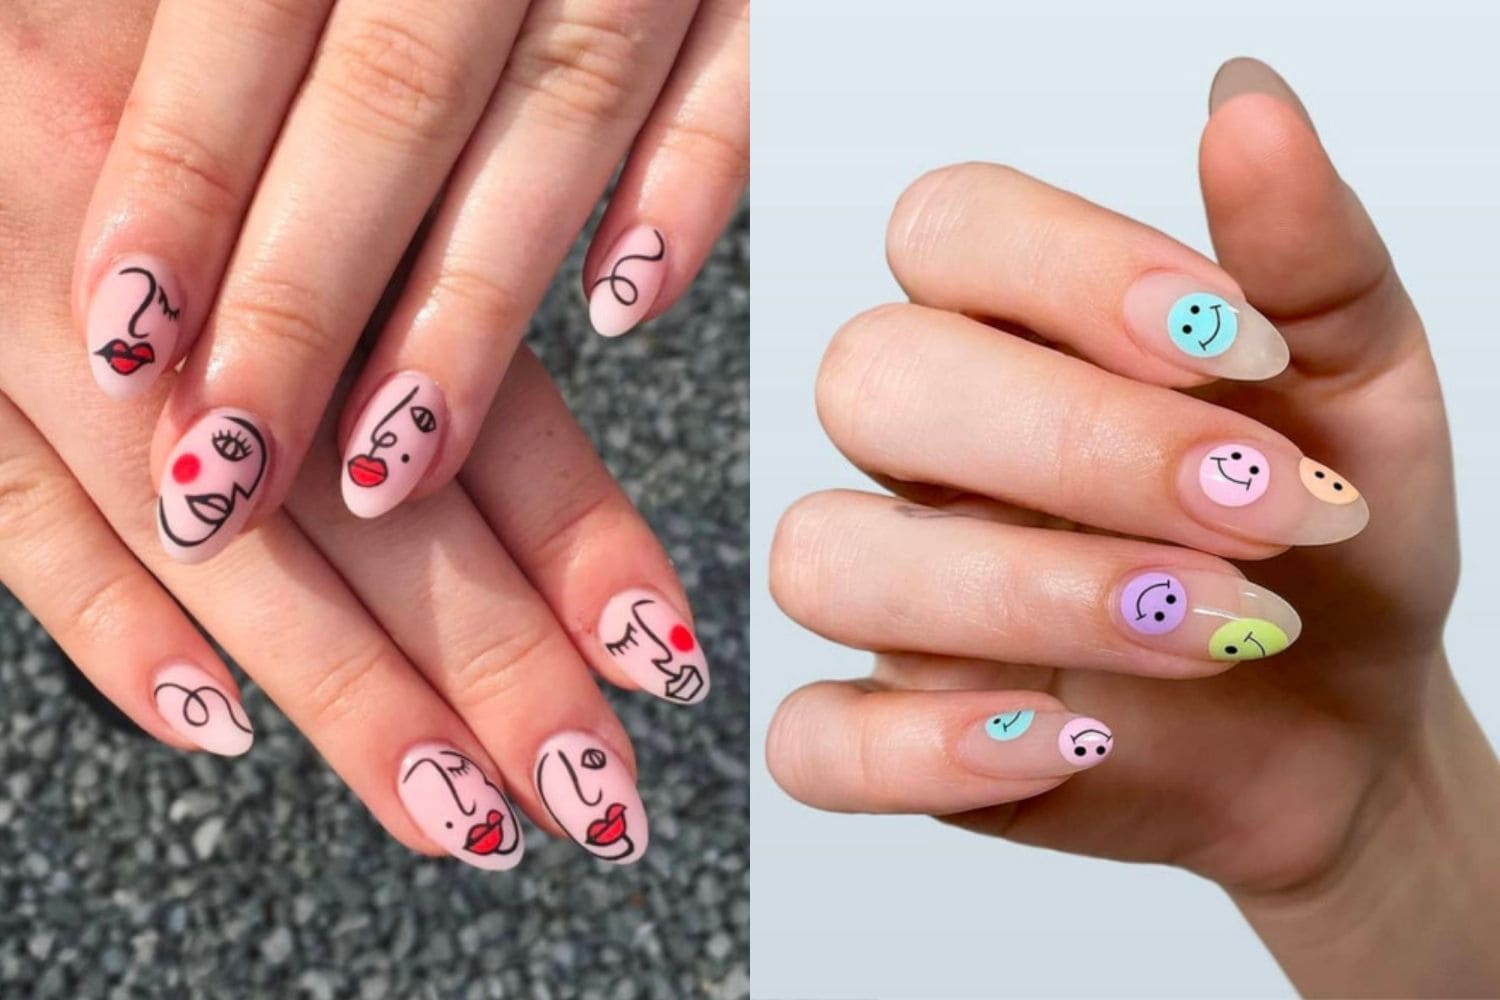 30 Creative Nail Designs to Inspire Your Next Manicure - Let's Eat Cake